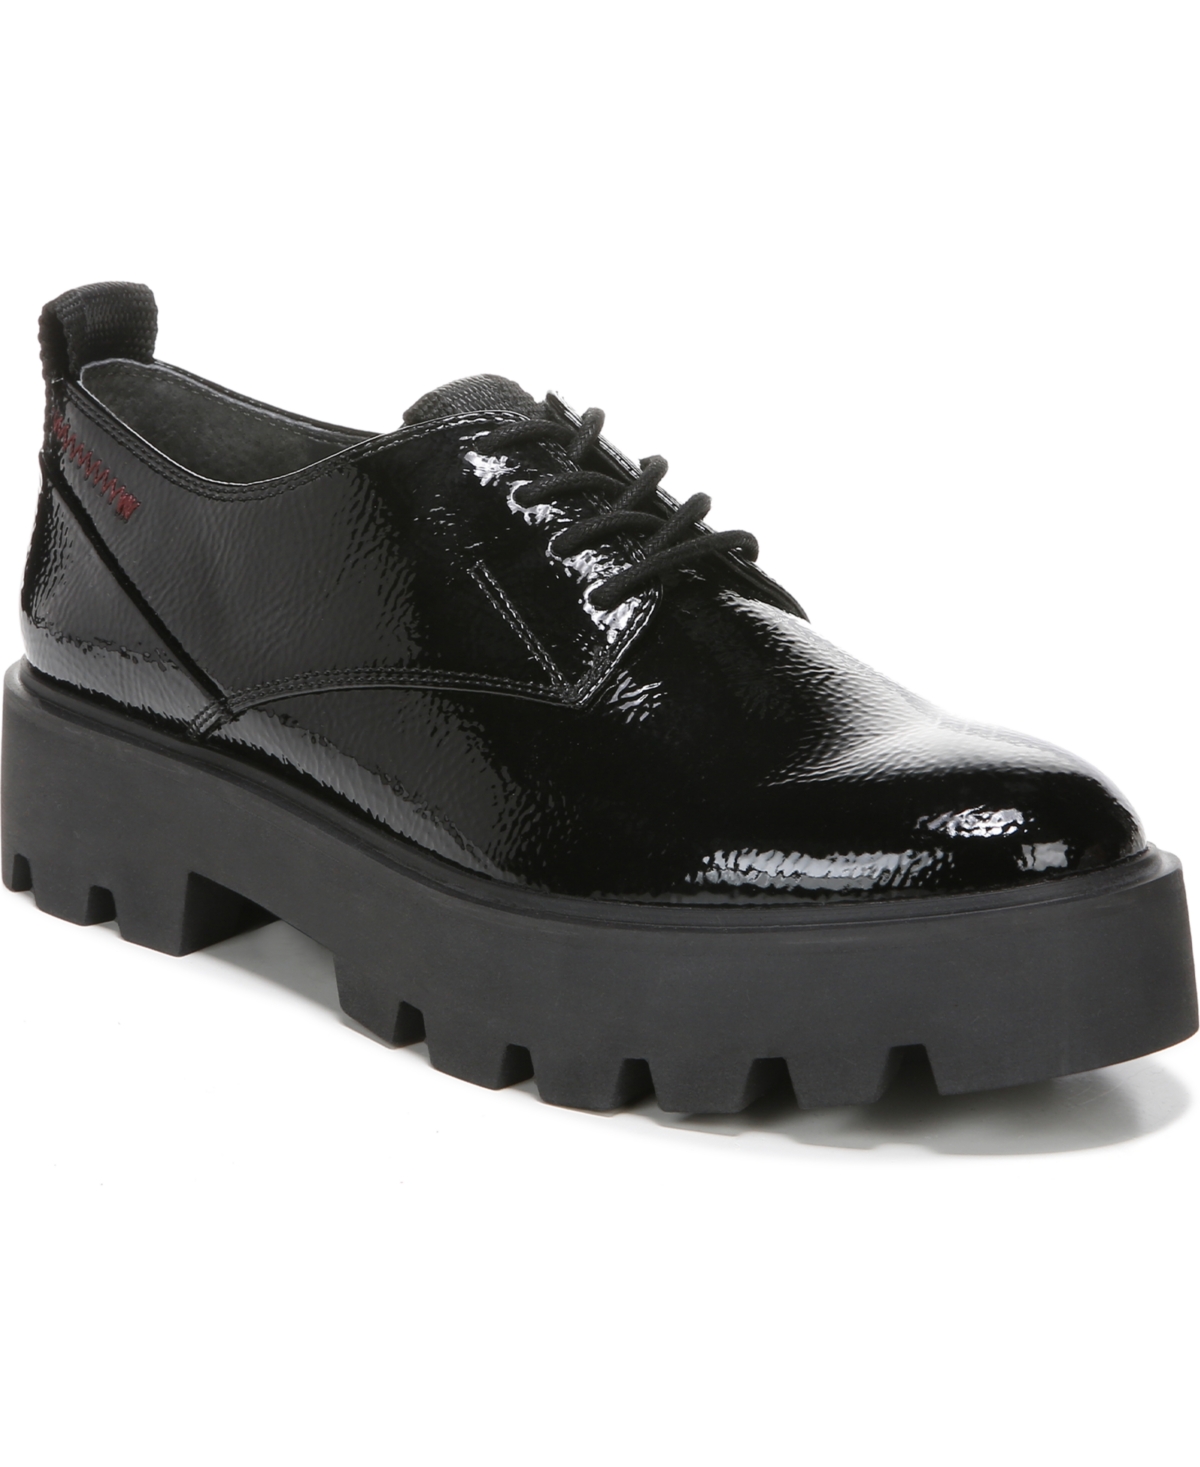 UPC 017138587327 product image for Franco Sarto Balin Laced Lug Sole Oxfords Women's Shoes | upcitemdb.com